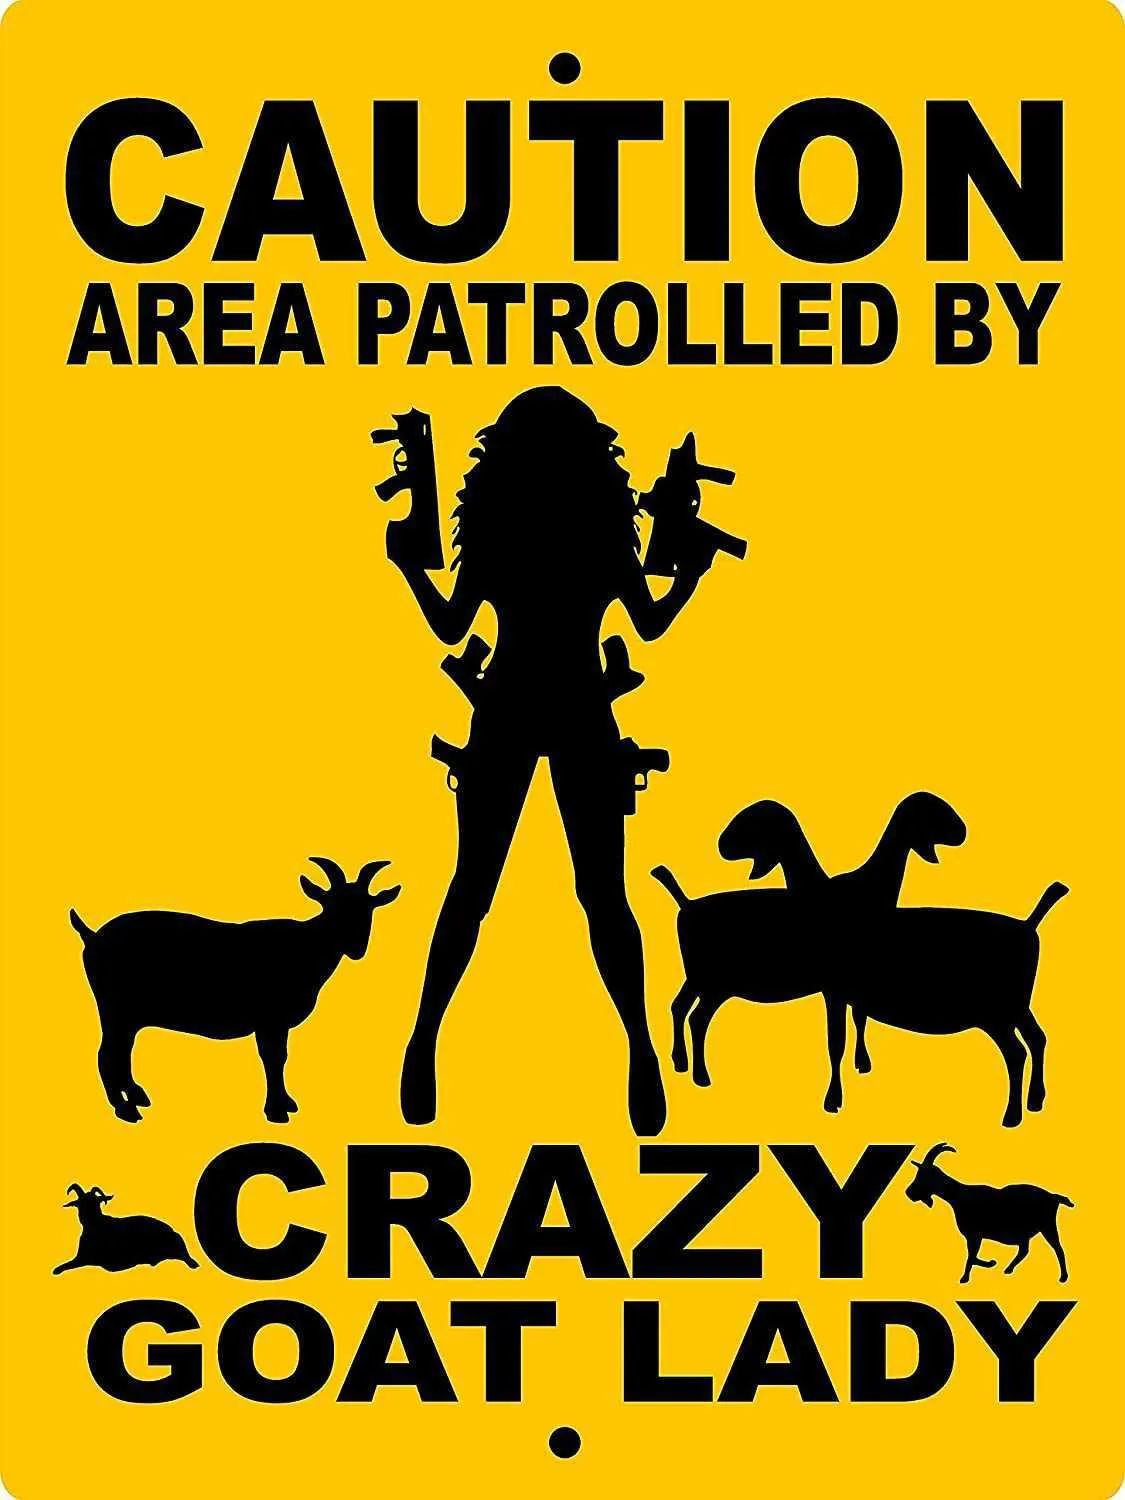 Man Woman Gift Farm Tin Sign Caution Area Patrolled by Crazy Goat Lady Poster Farm Courtyard Home Bar Wall Decoration 6x8 inches5846926